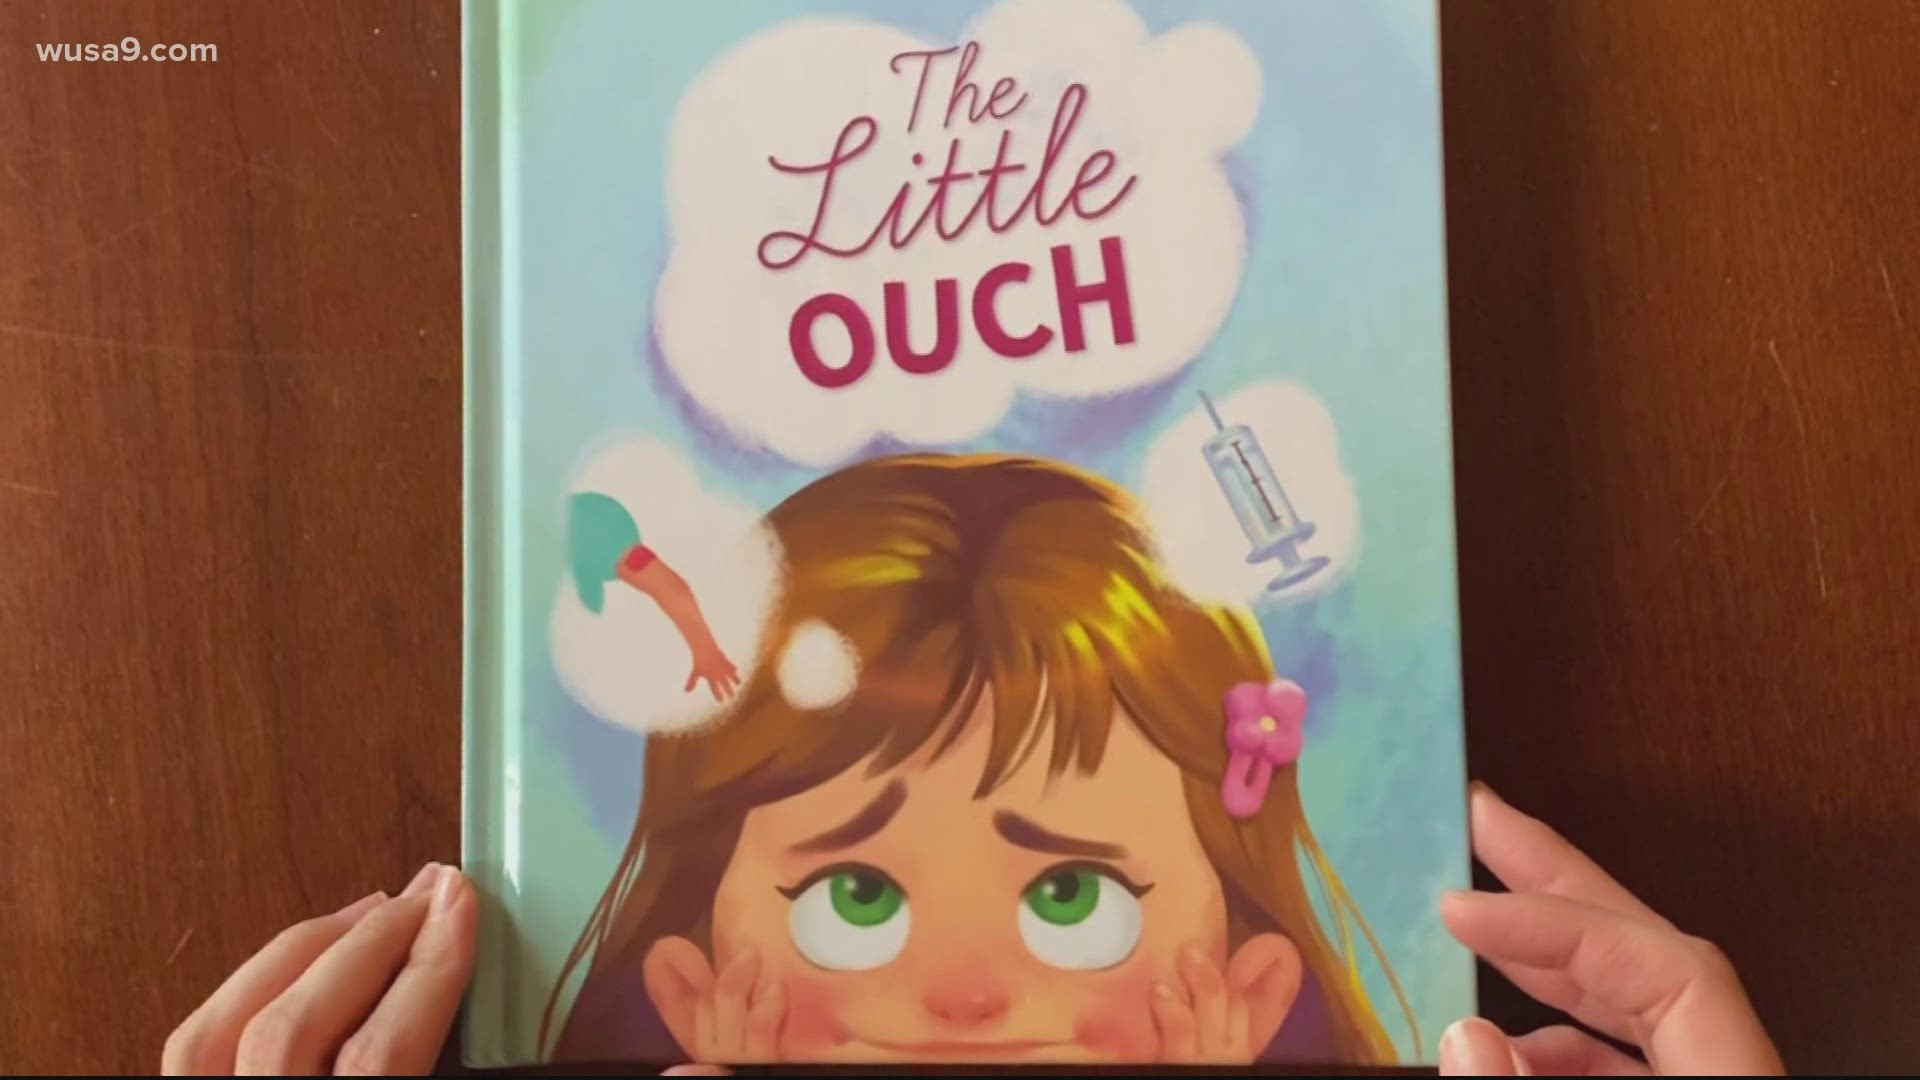 Katherine Picarde wrote the book "The Little Ouch" to help kids who are afraid of going to the doctor’s office.